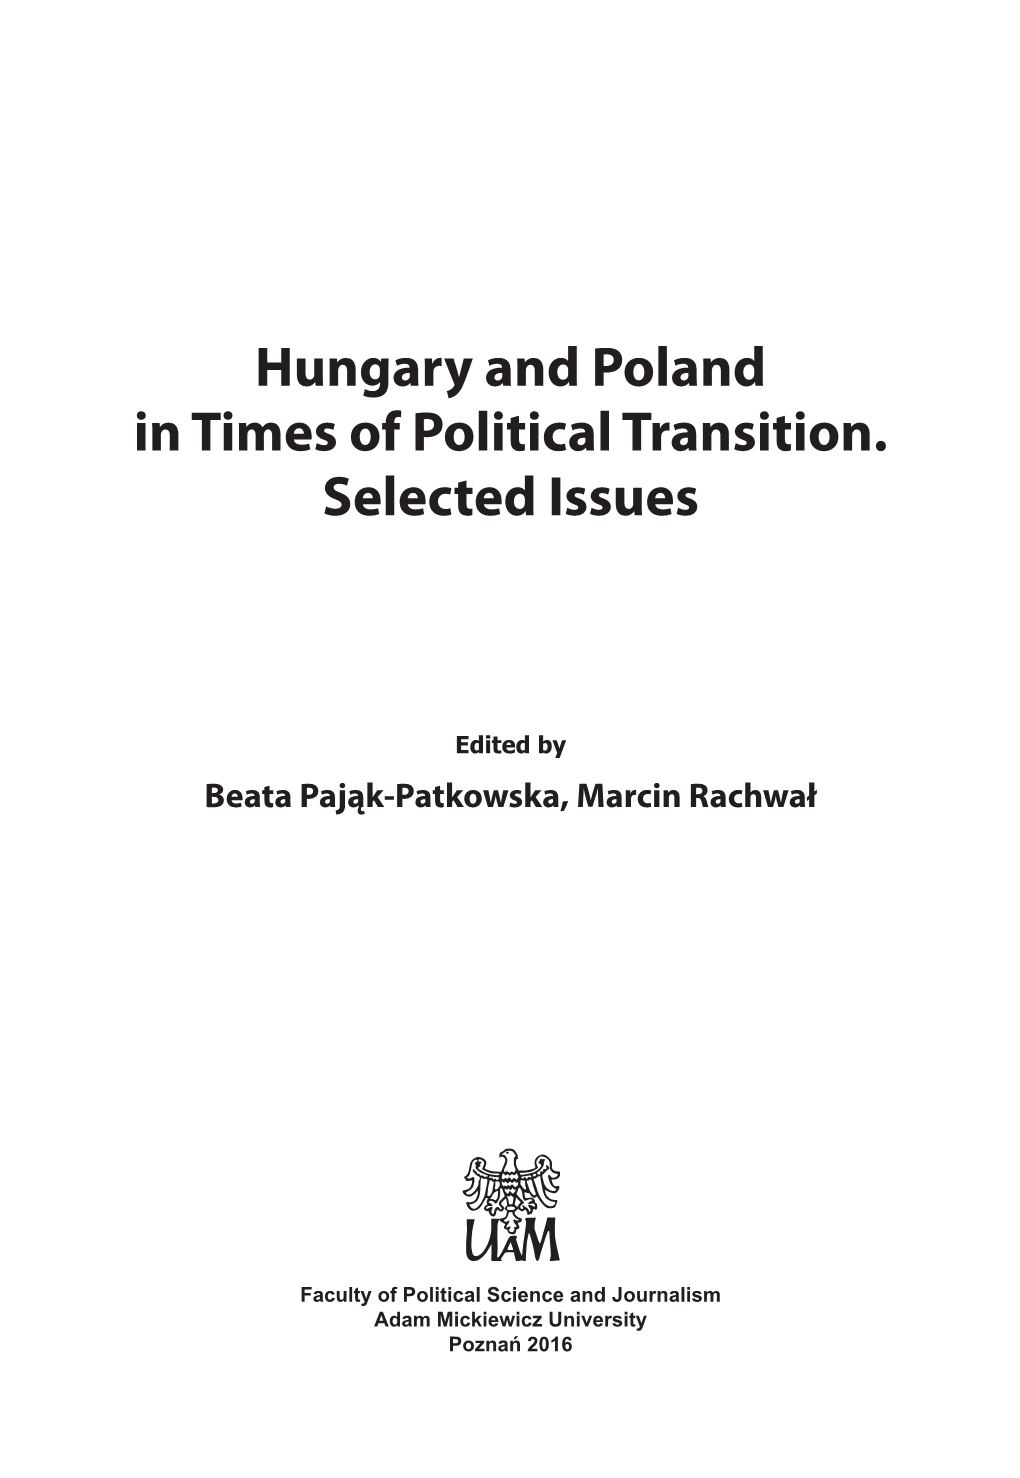 Hungary and Poland in Times of Political Transition. Selected Issues